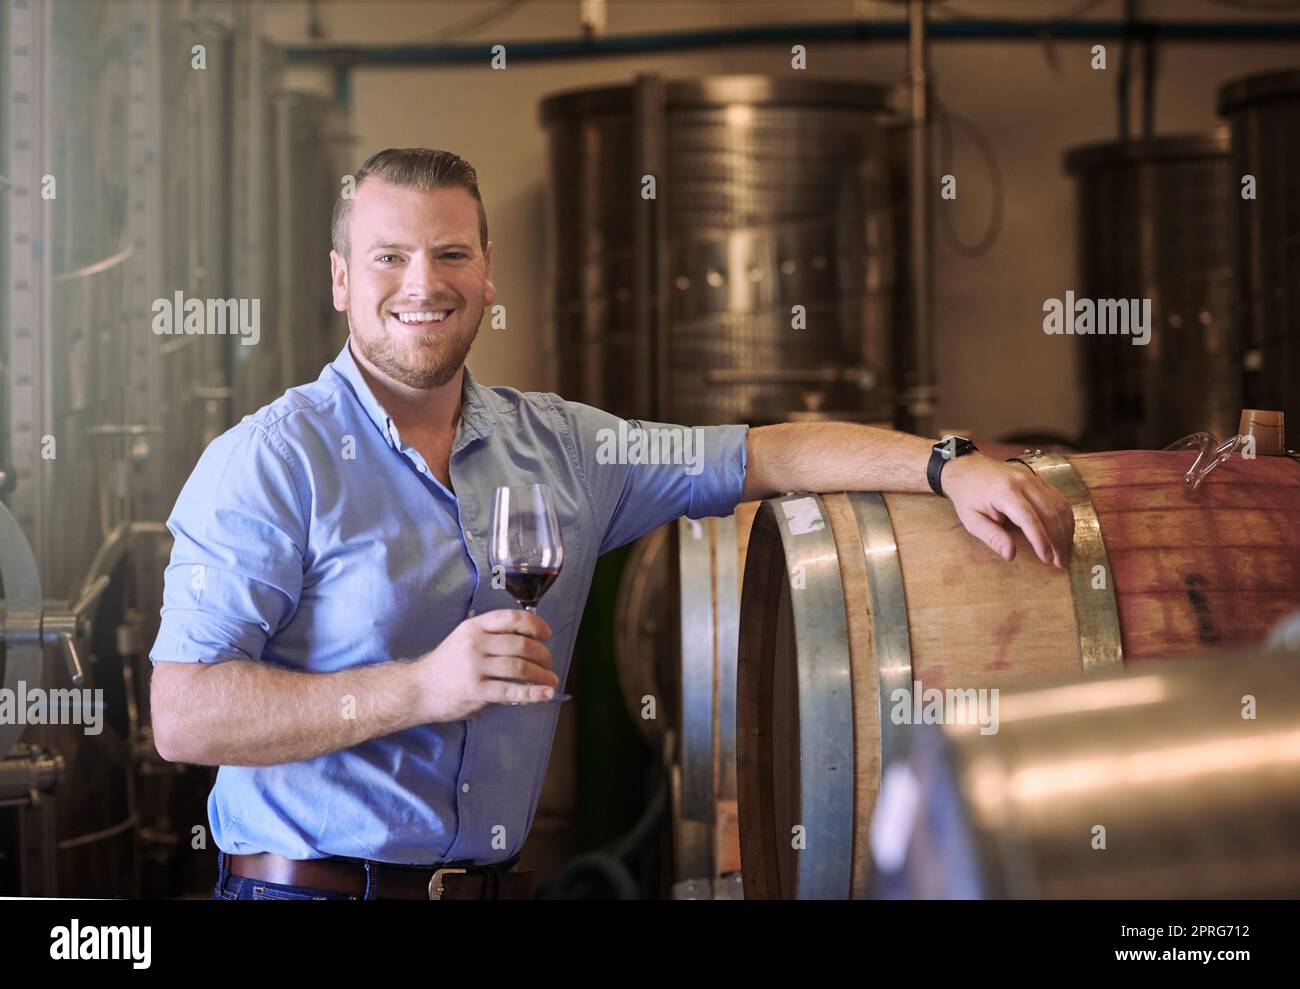 These wines dont just taste good, they do good...a man enjoying wine tasting in his distillery. Stock Photo